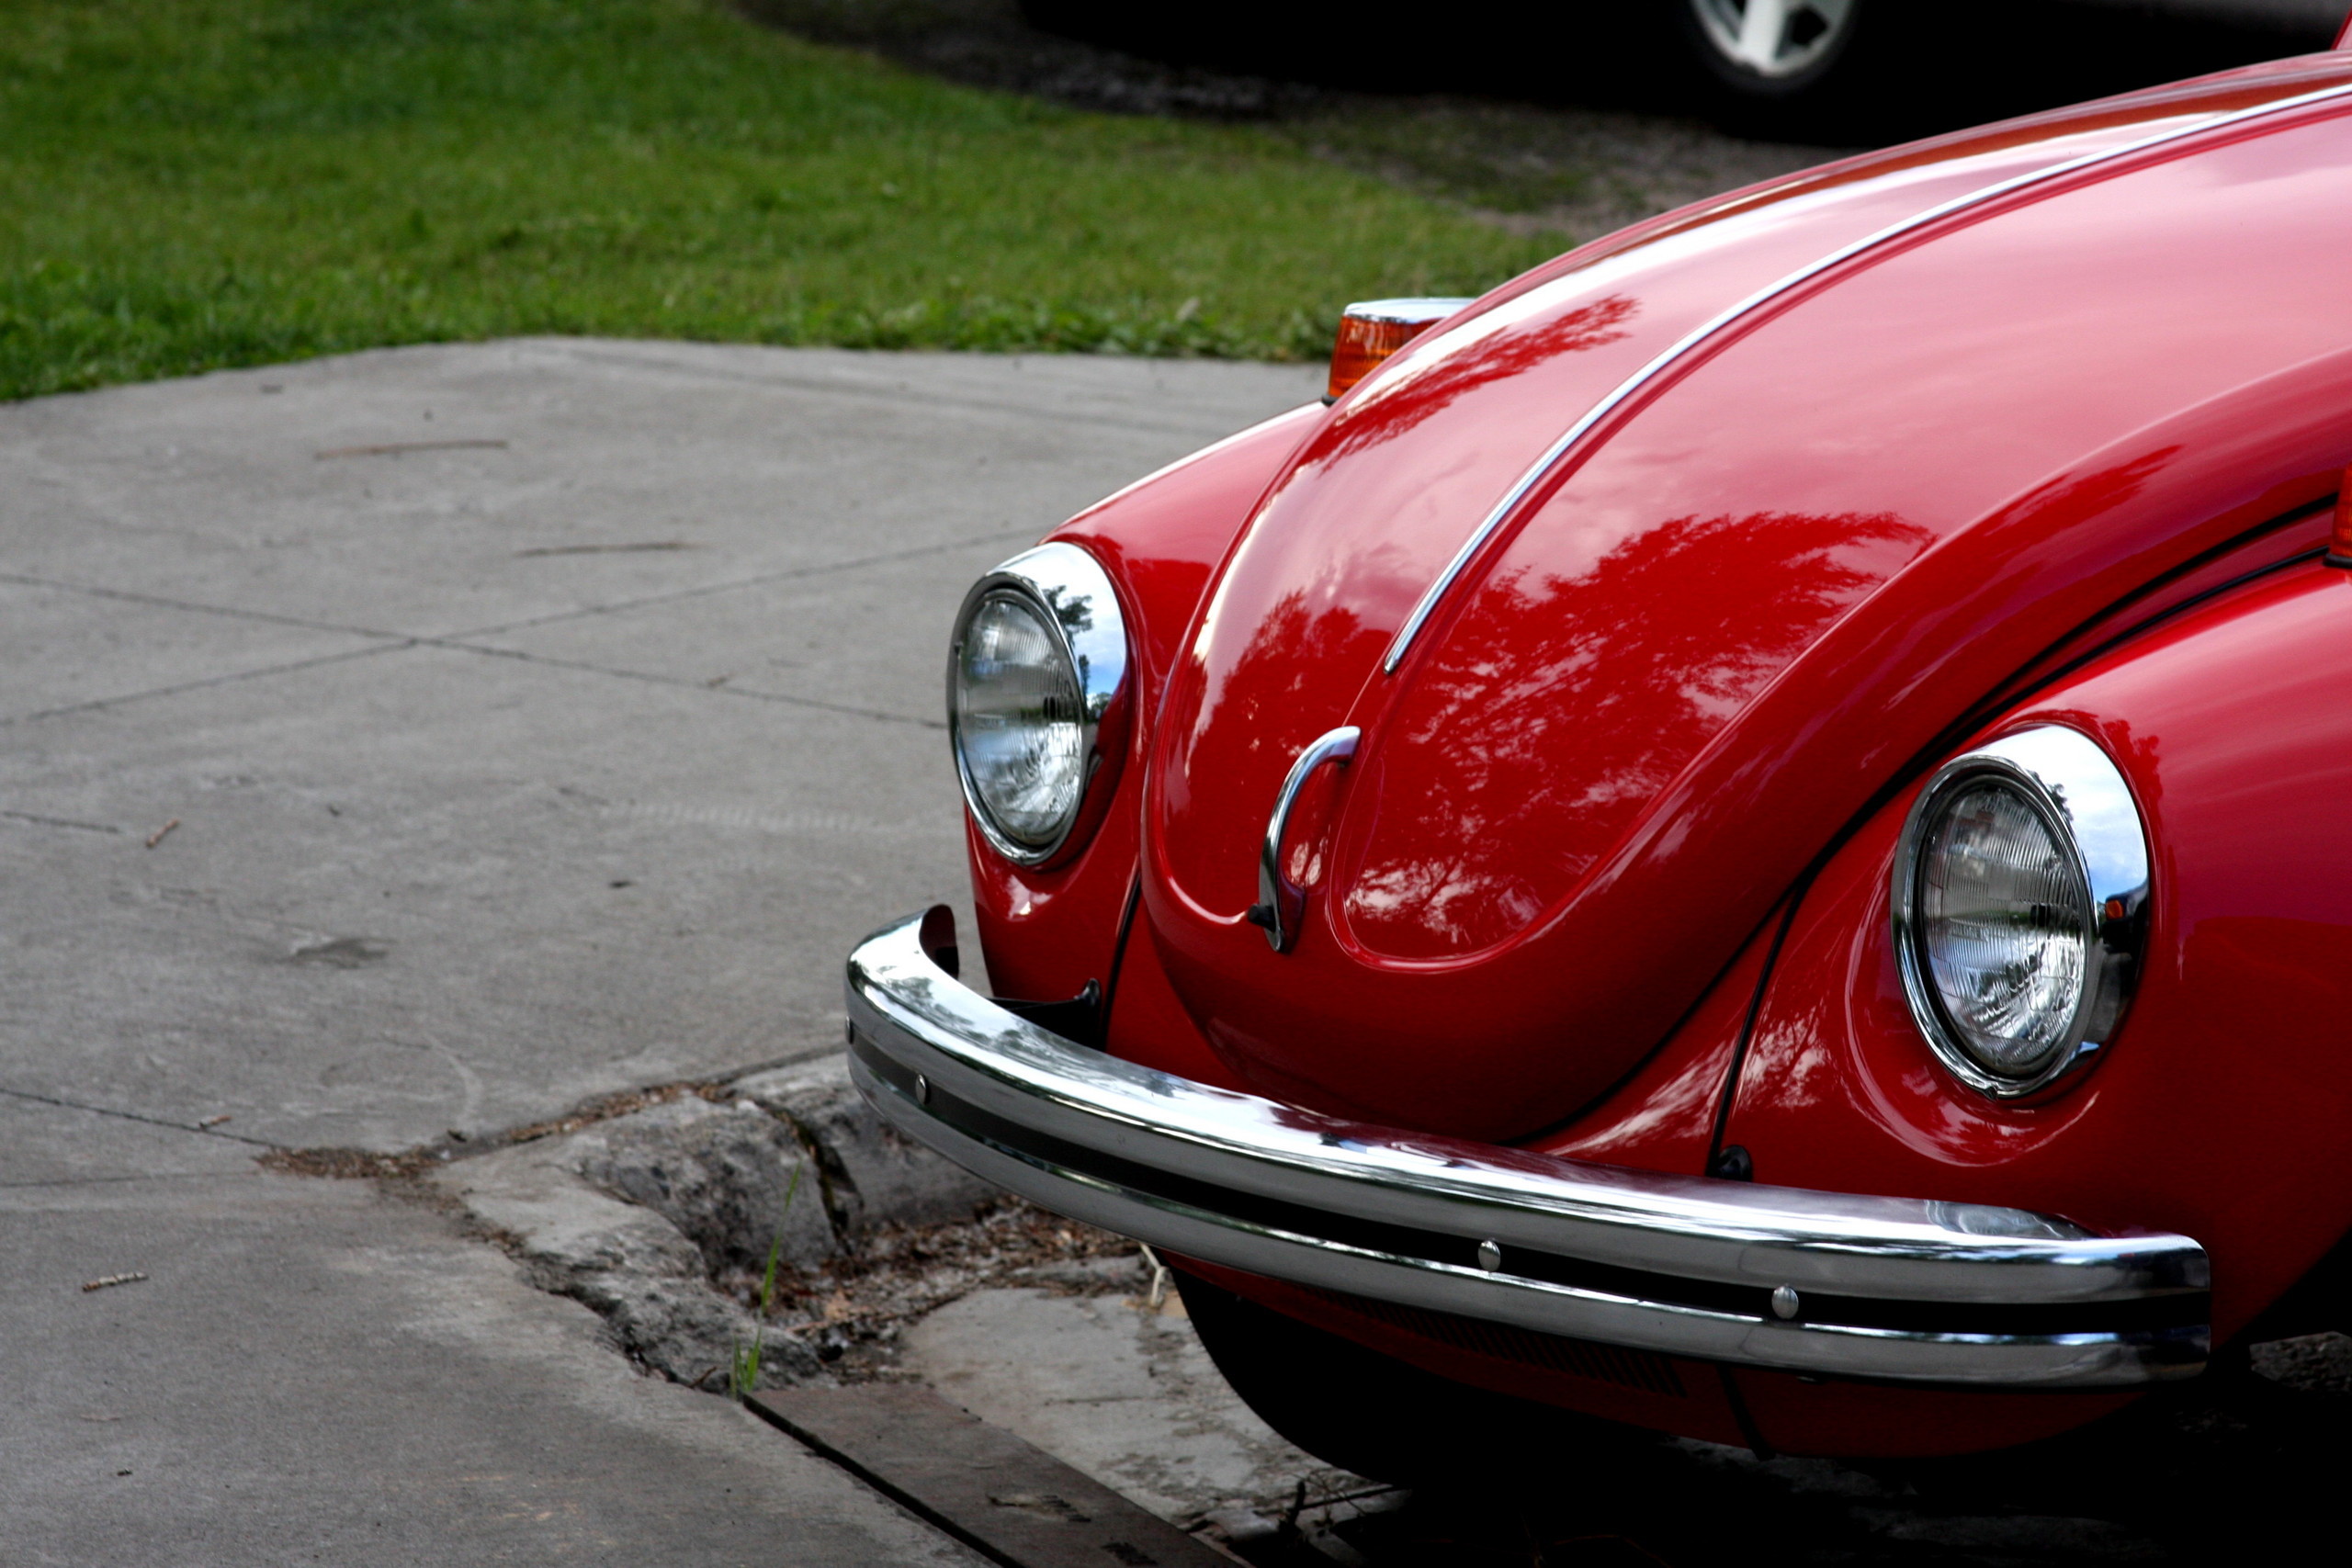 Volkswagen Beetle images vw beetle HD wallpaper and background photos